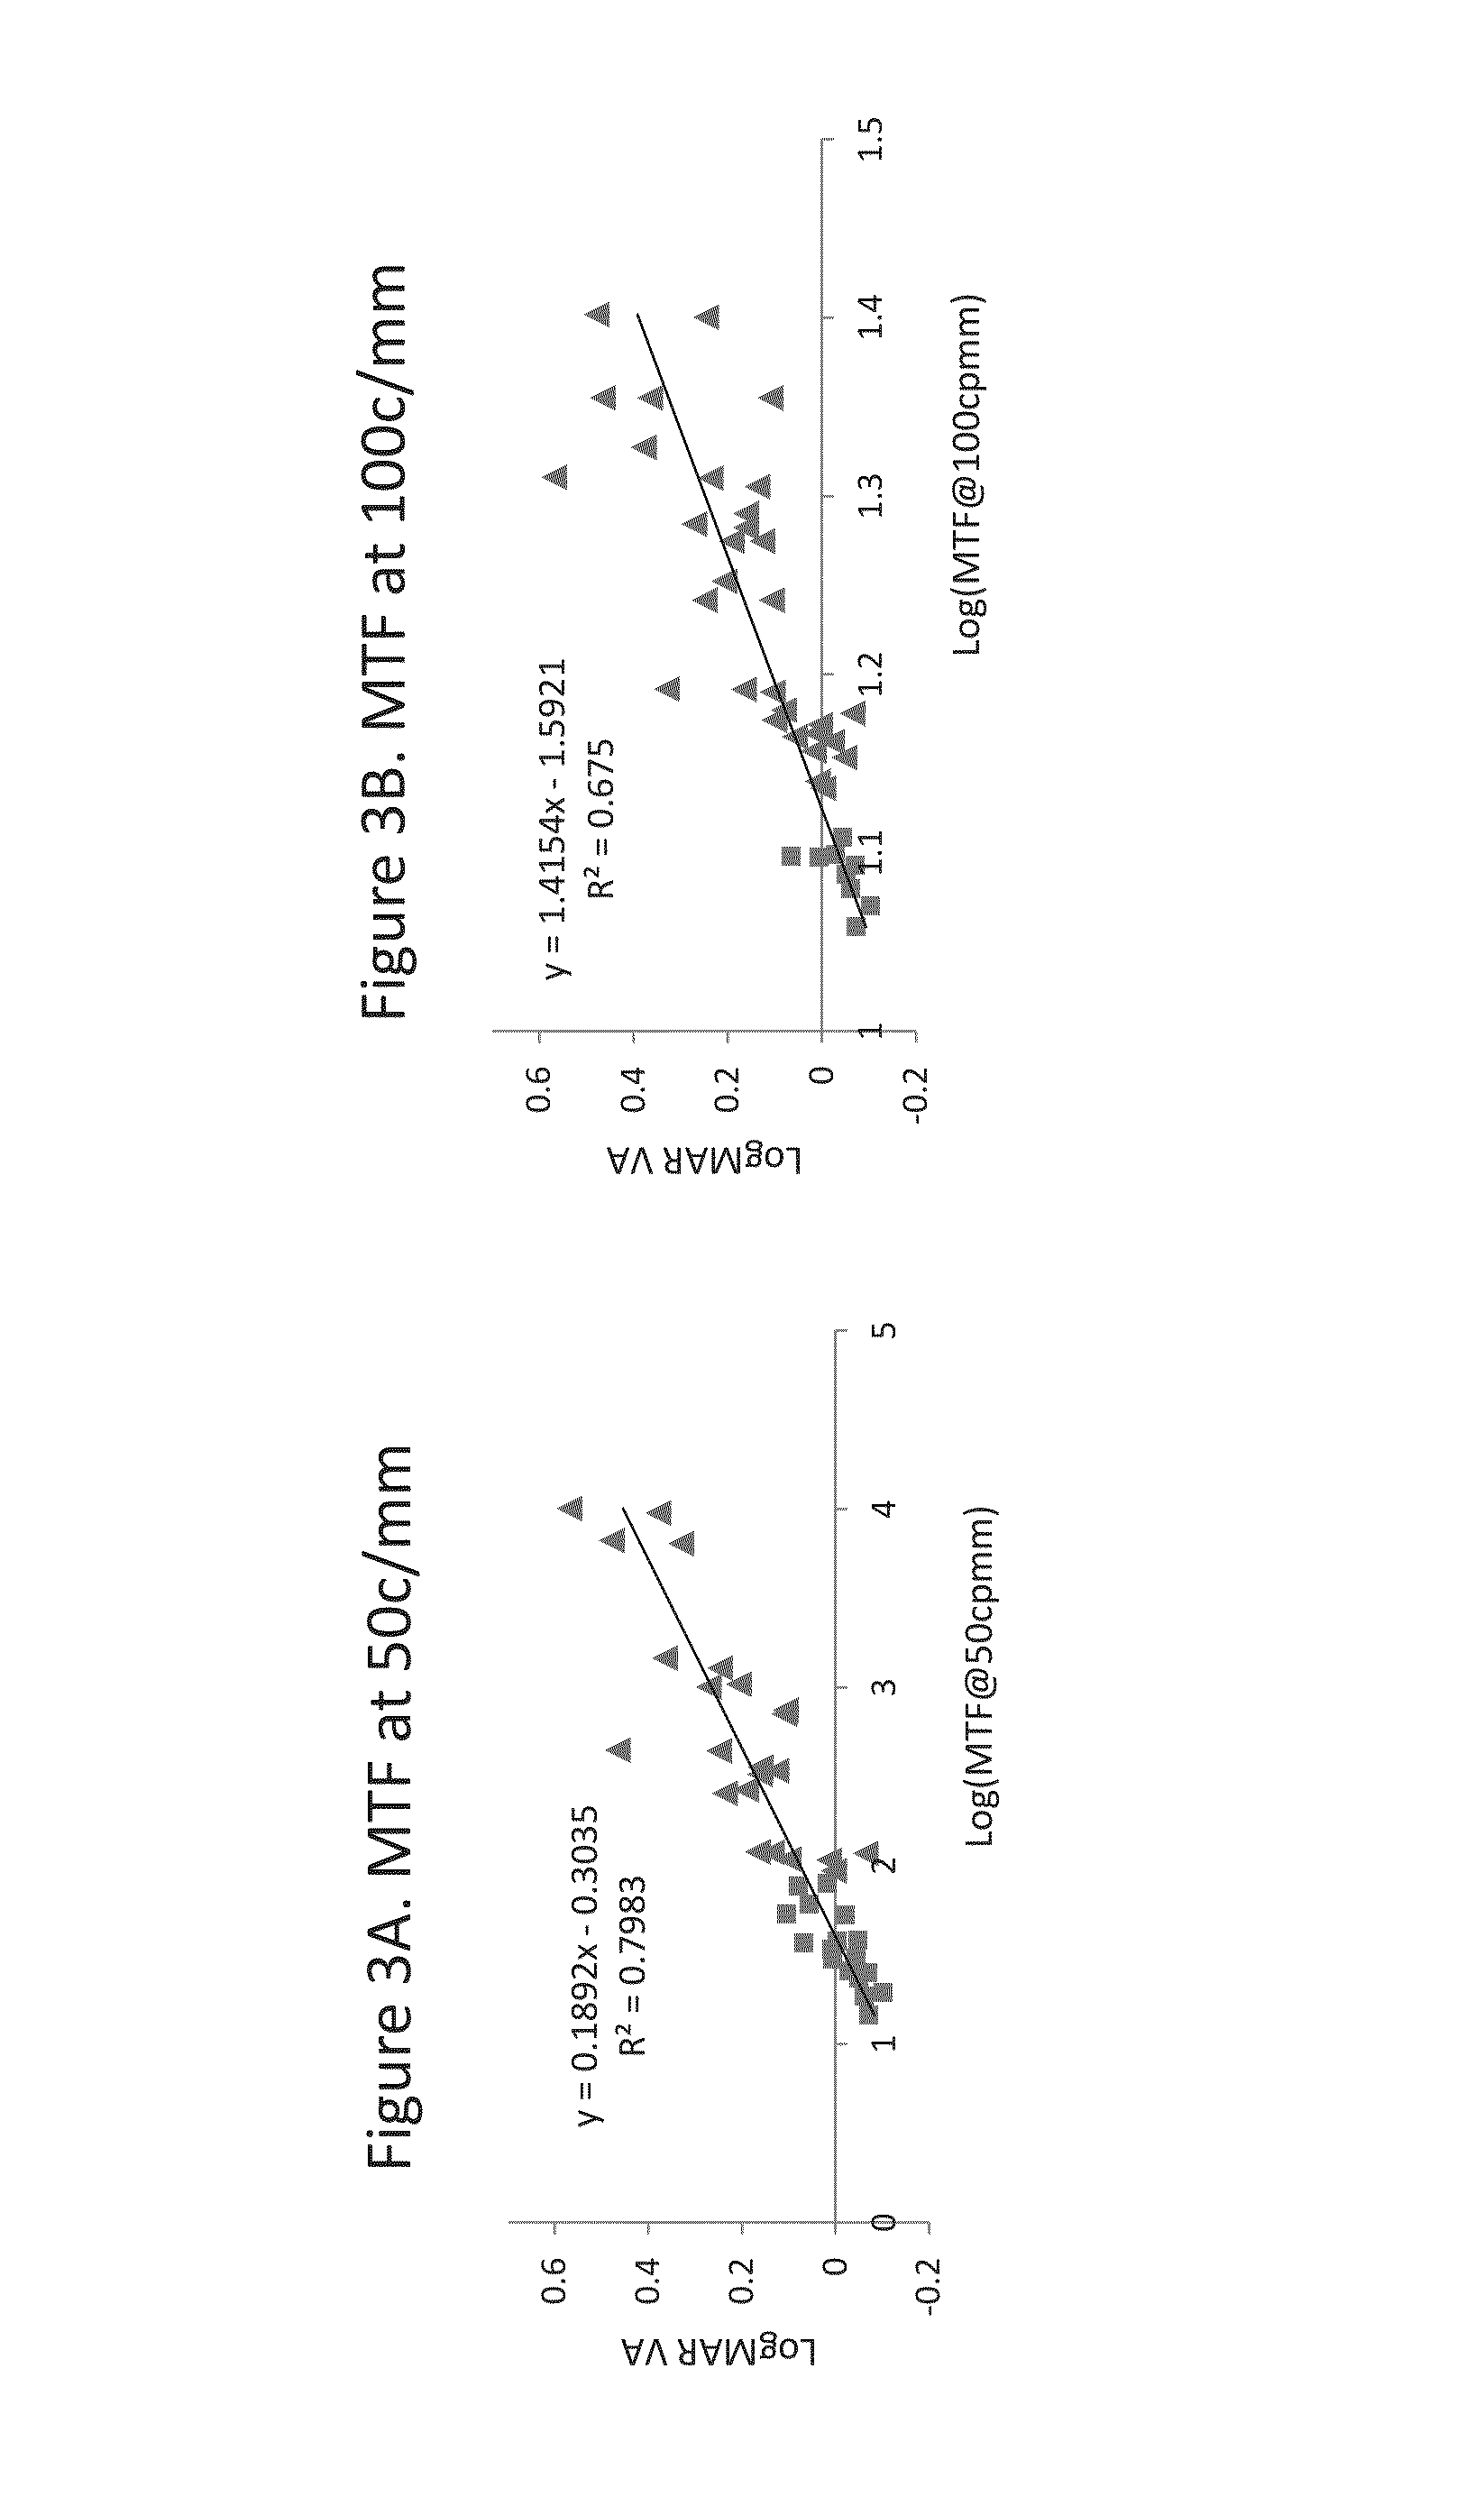 Apparatus, systems and methods for improving visual outcomes for pseudophakic patients